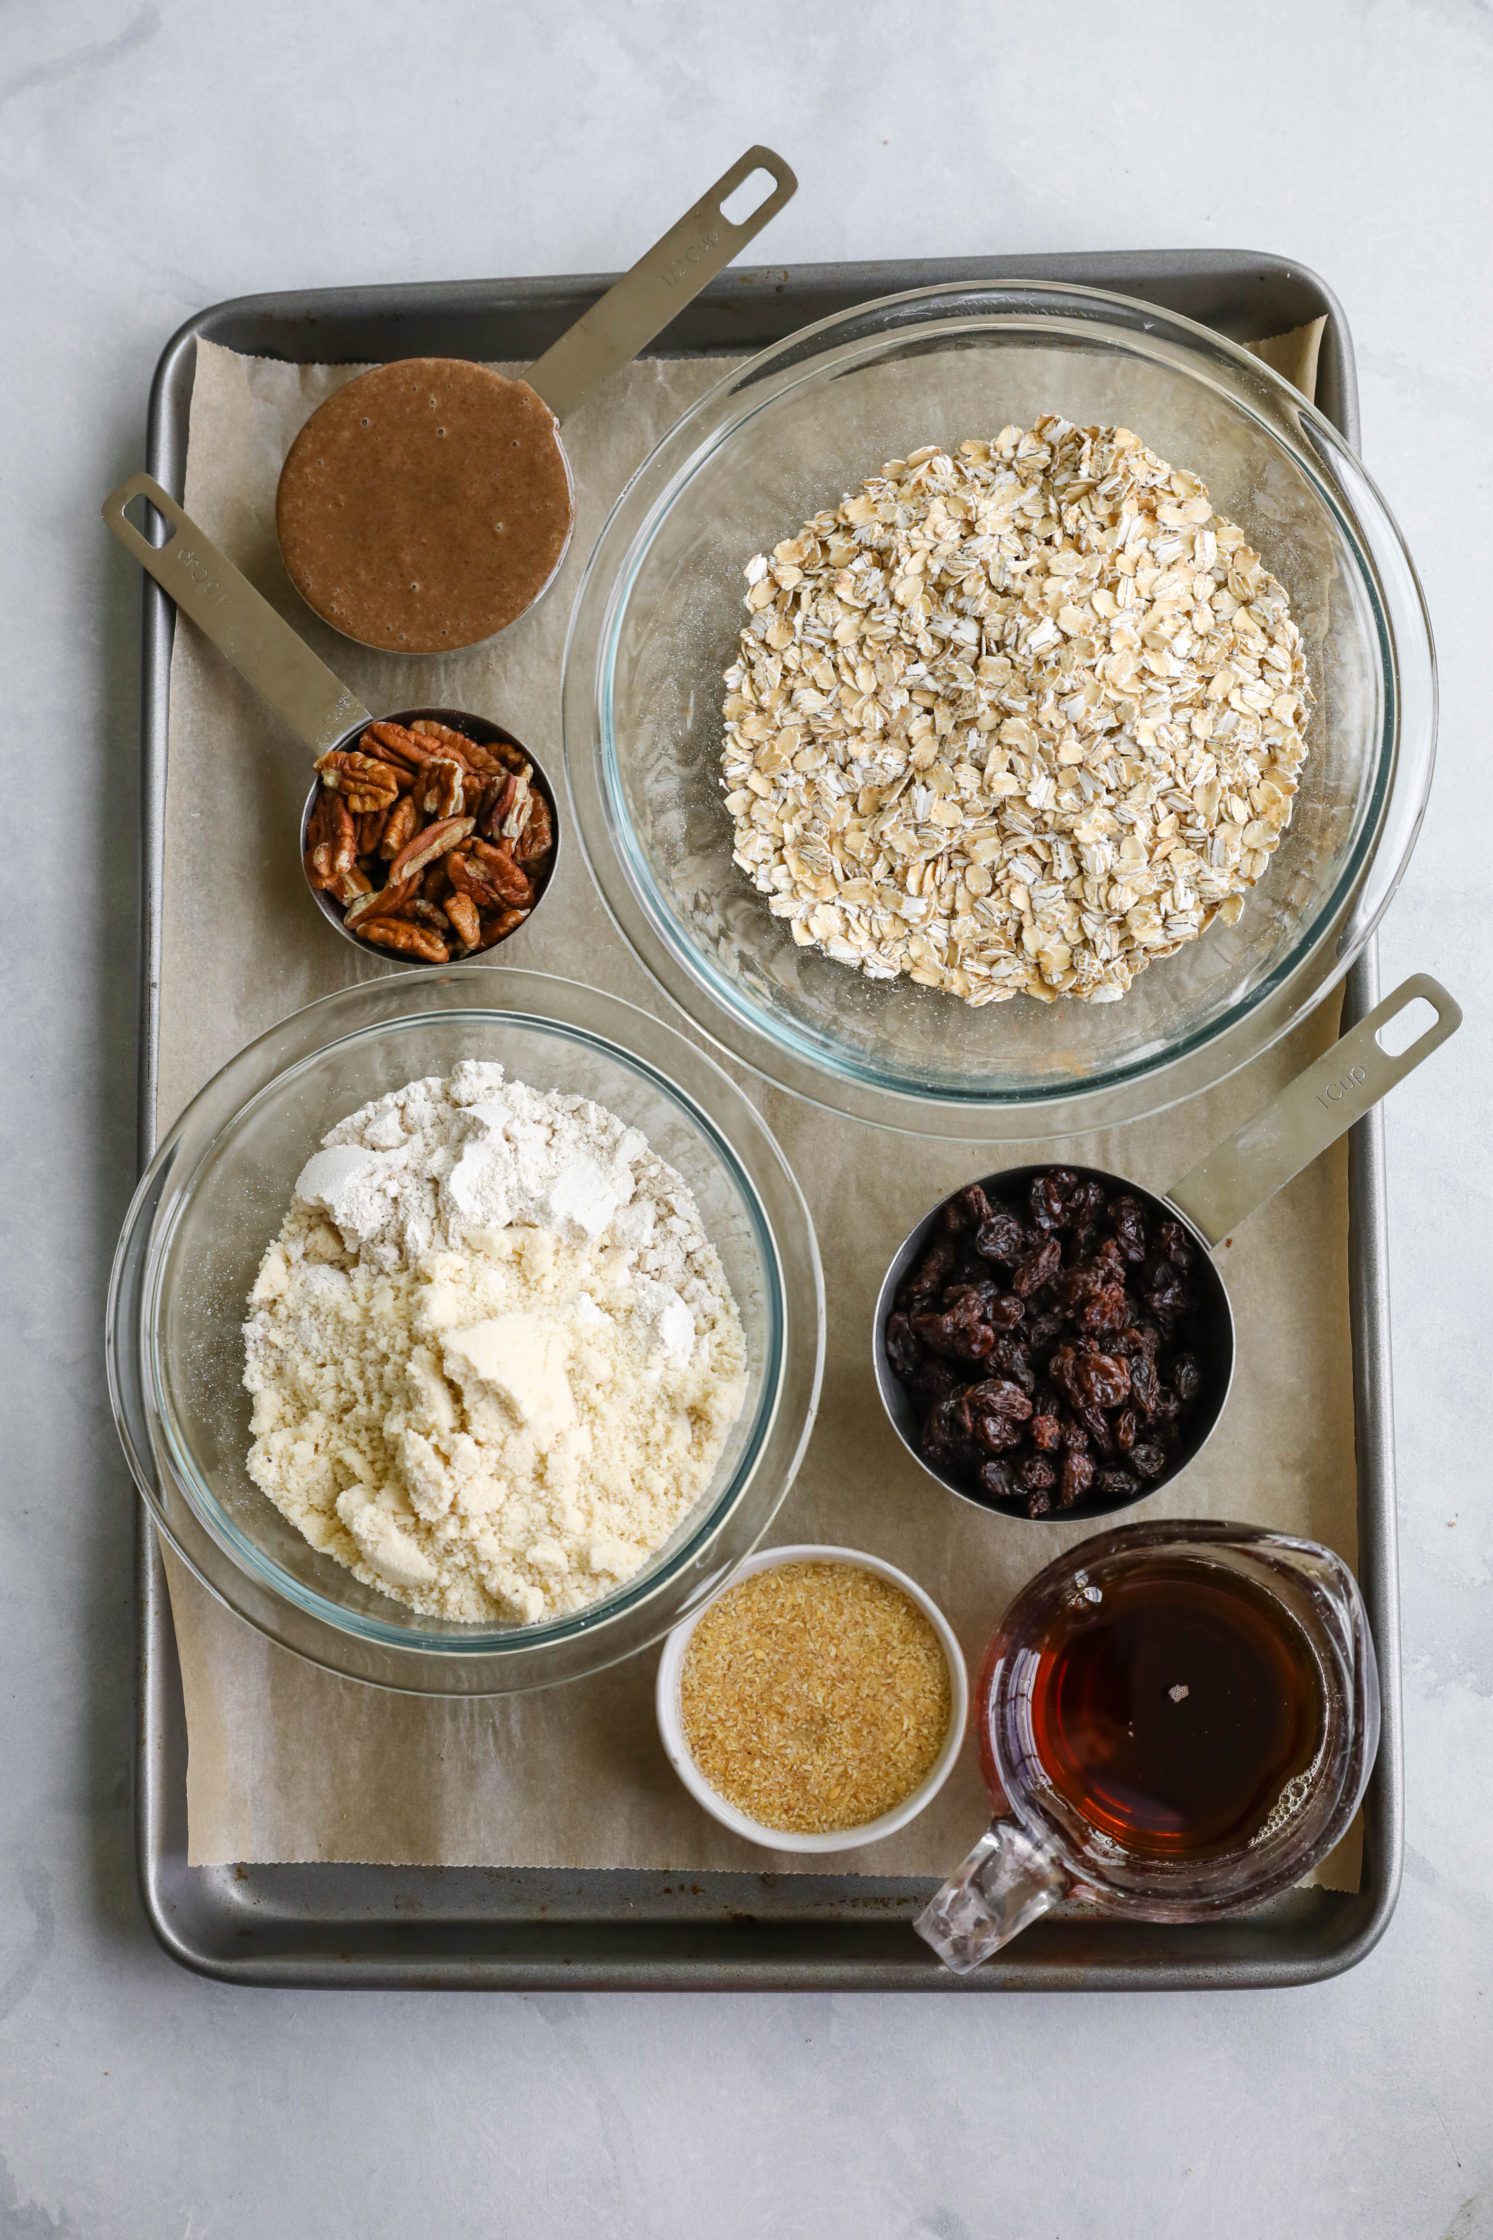 Oatmeal Raisin Pecan Cookie Ingredients on parchment lined baking sheet by Flora & Vino